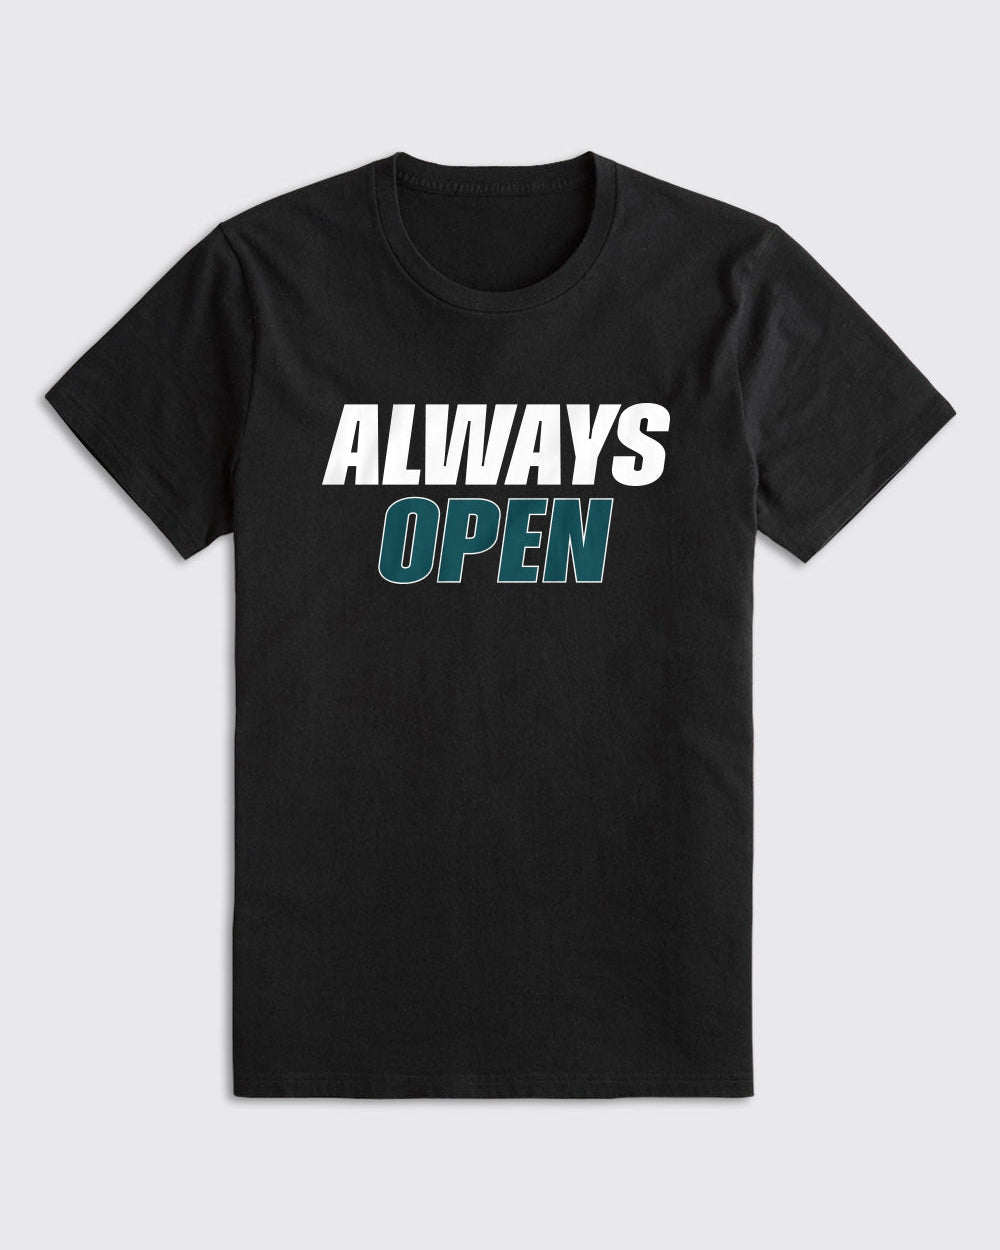 Always Open Shirt - Eagles, T-Shirts - Philly Sports Shirts